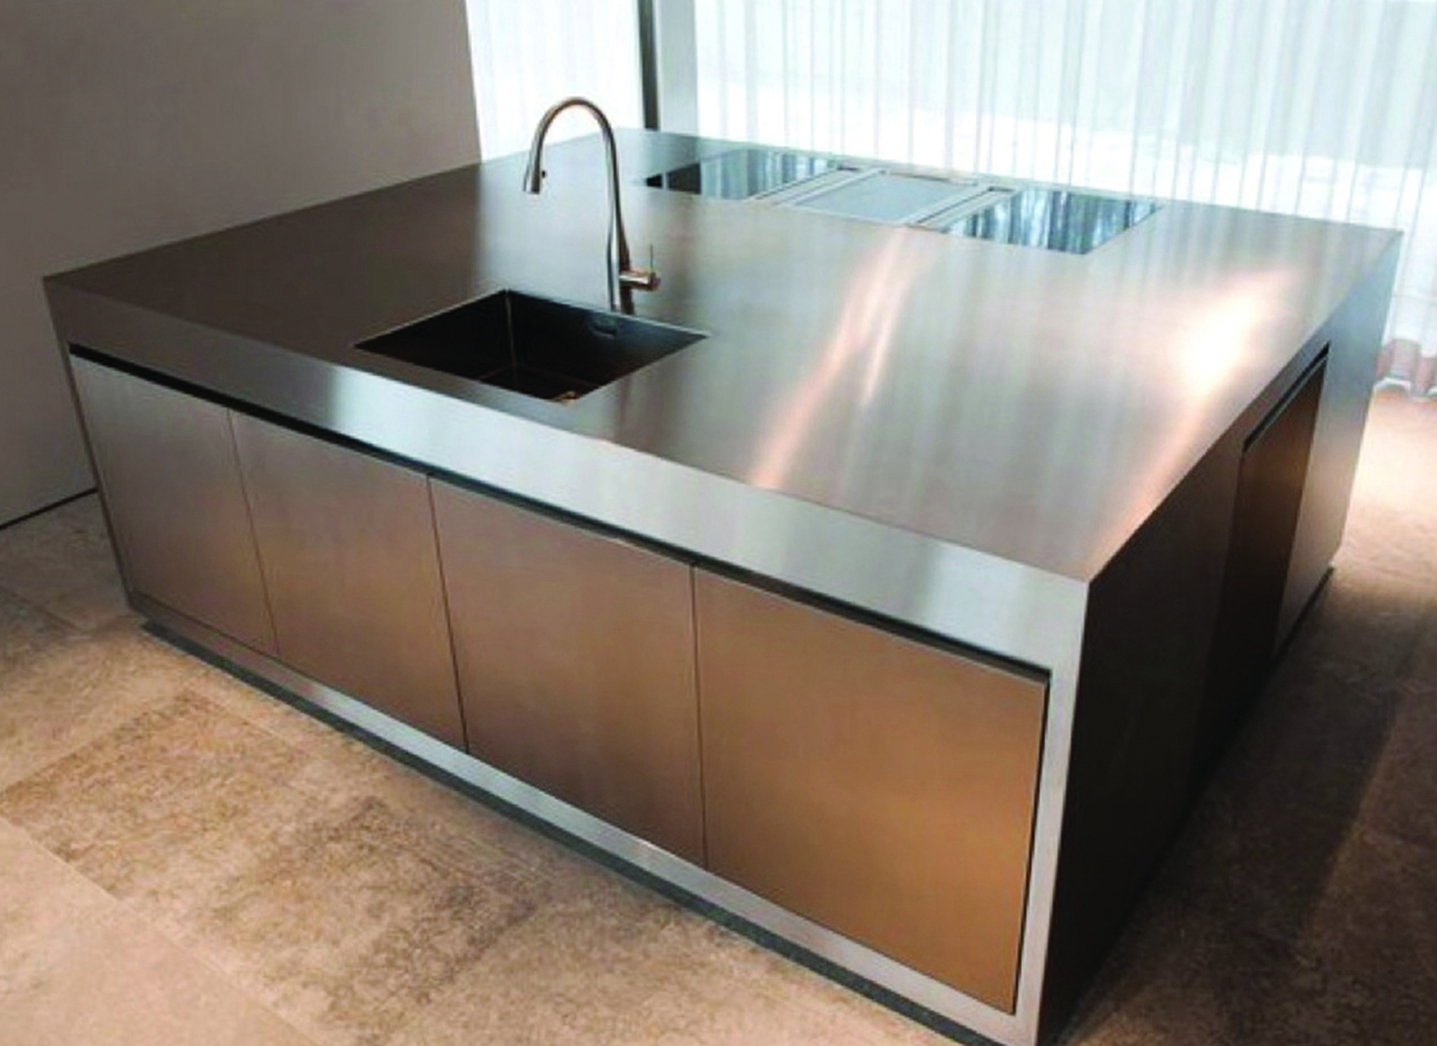 Strato_design_Non Plus Ultra_bespoke kitchen project in Berlin_mat stainless steel_06